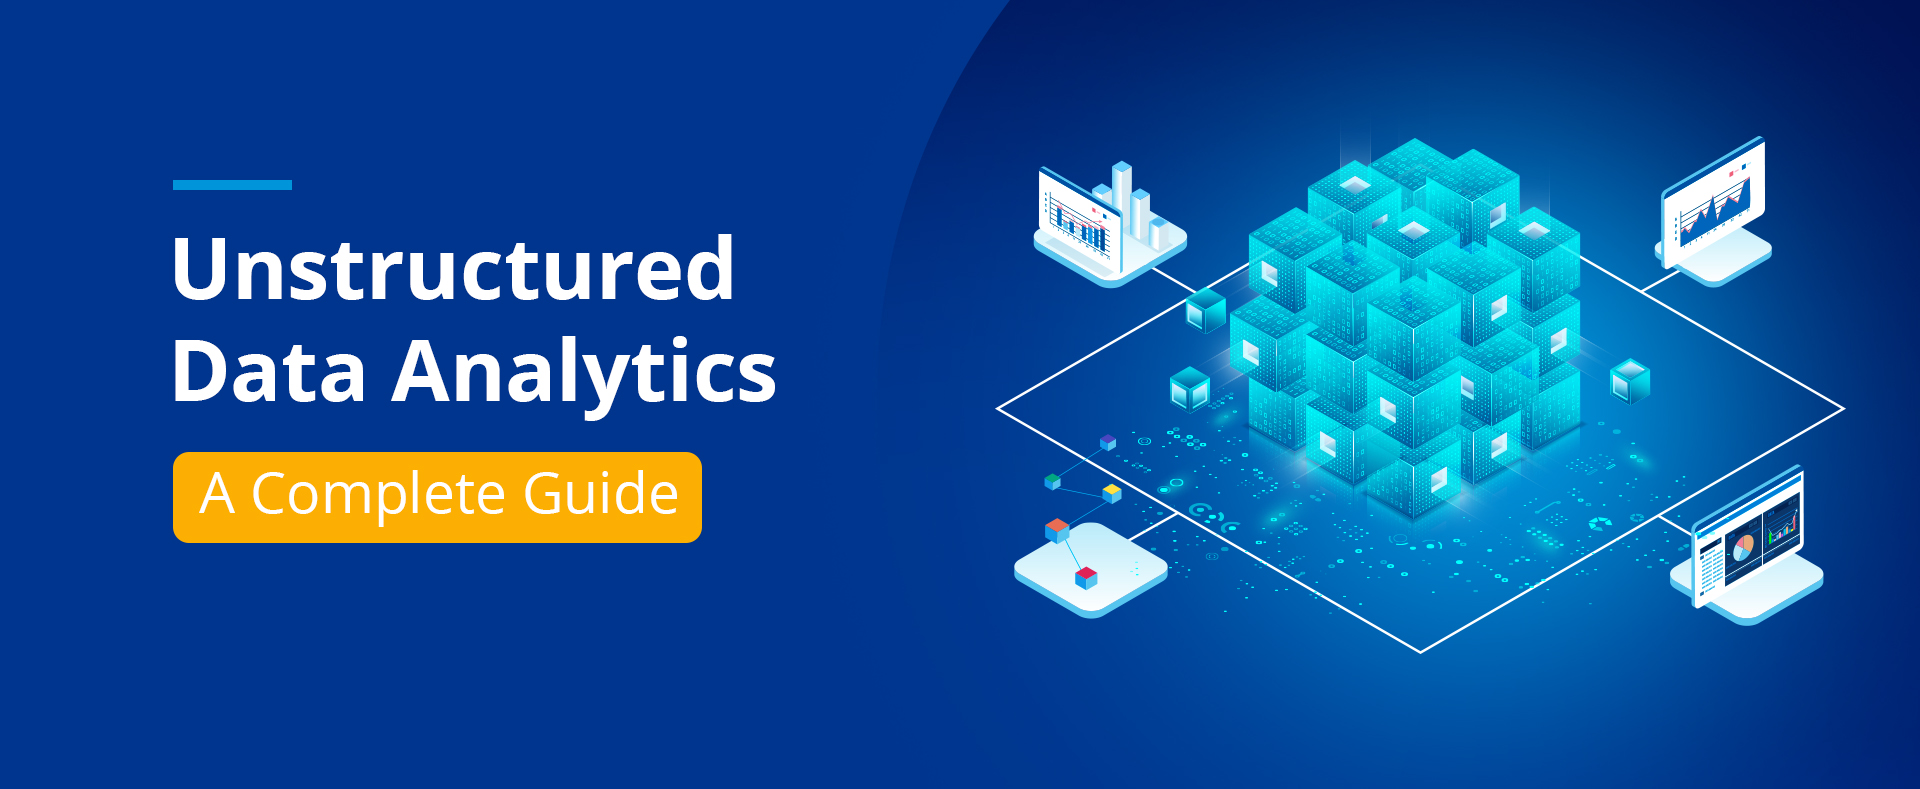 unstructured data analytics cover